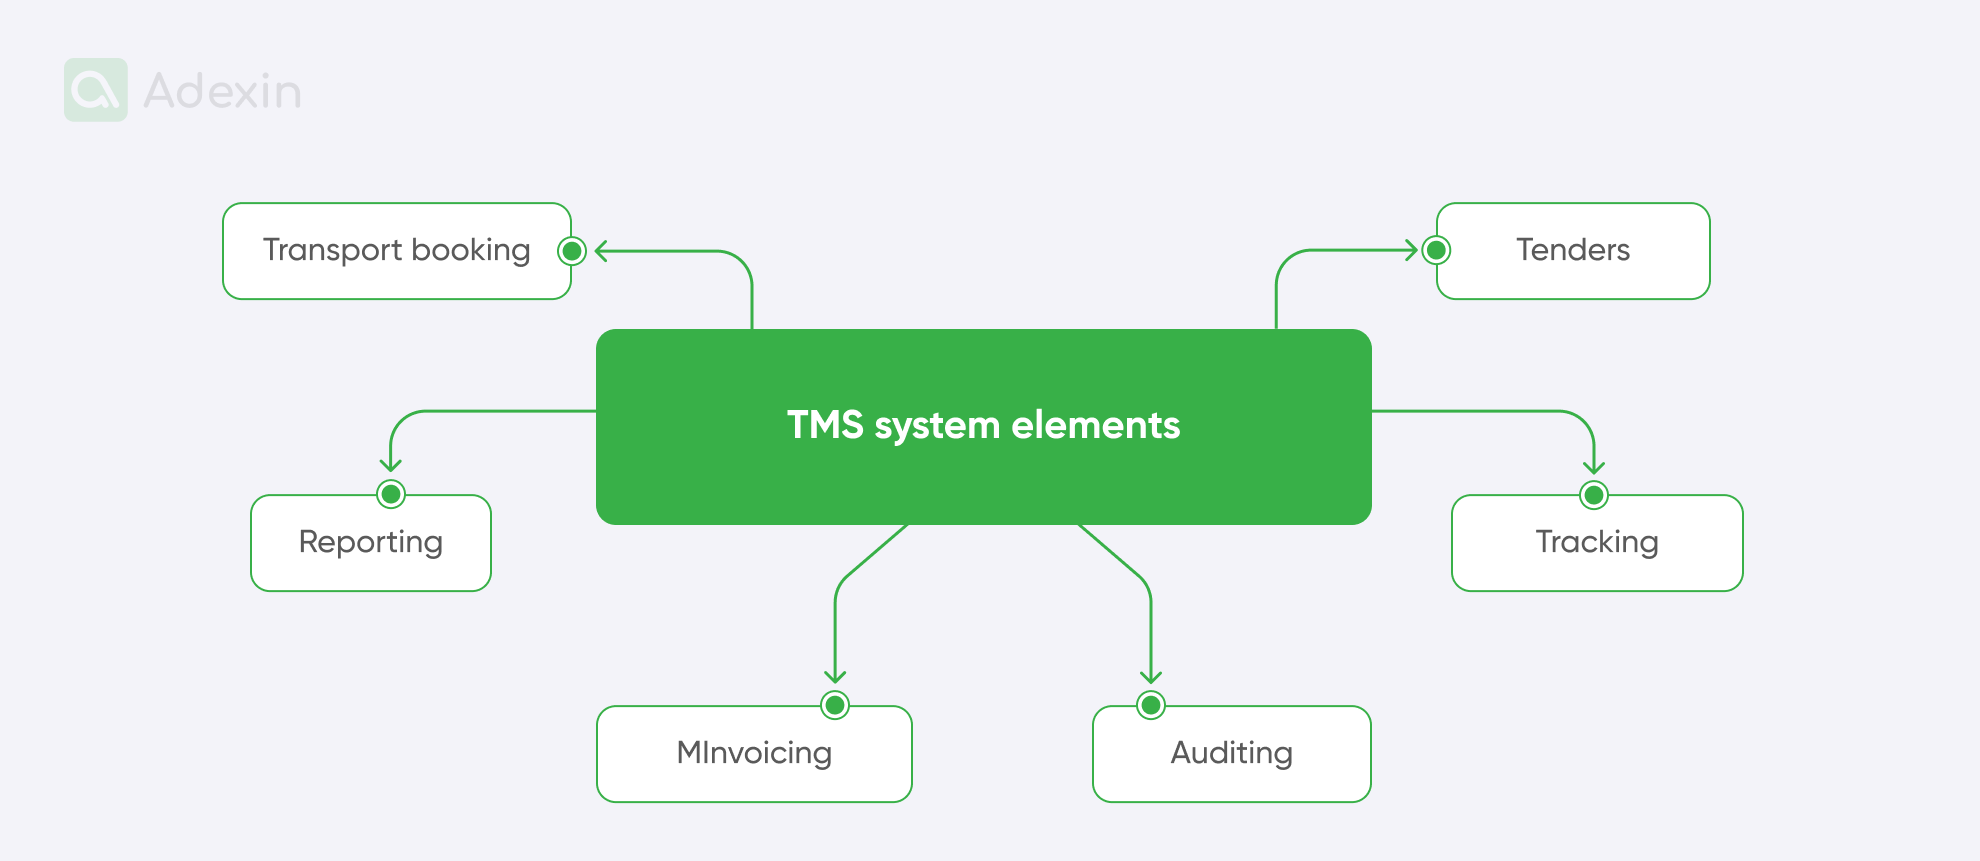 TMS system elements